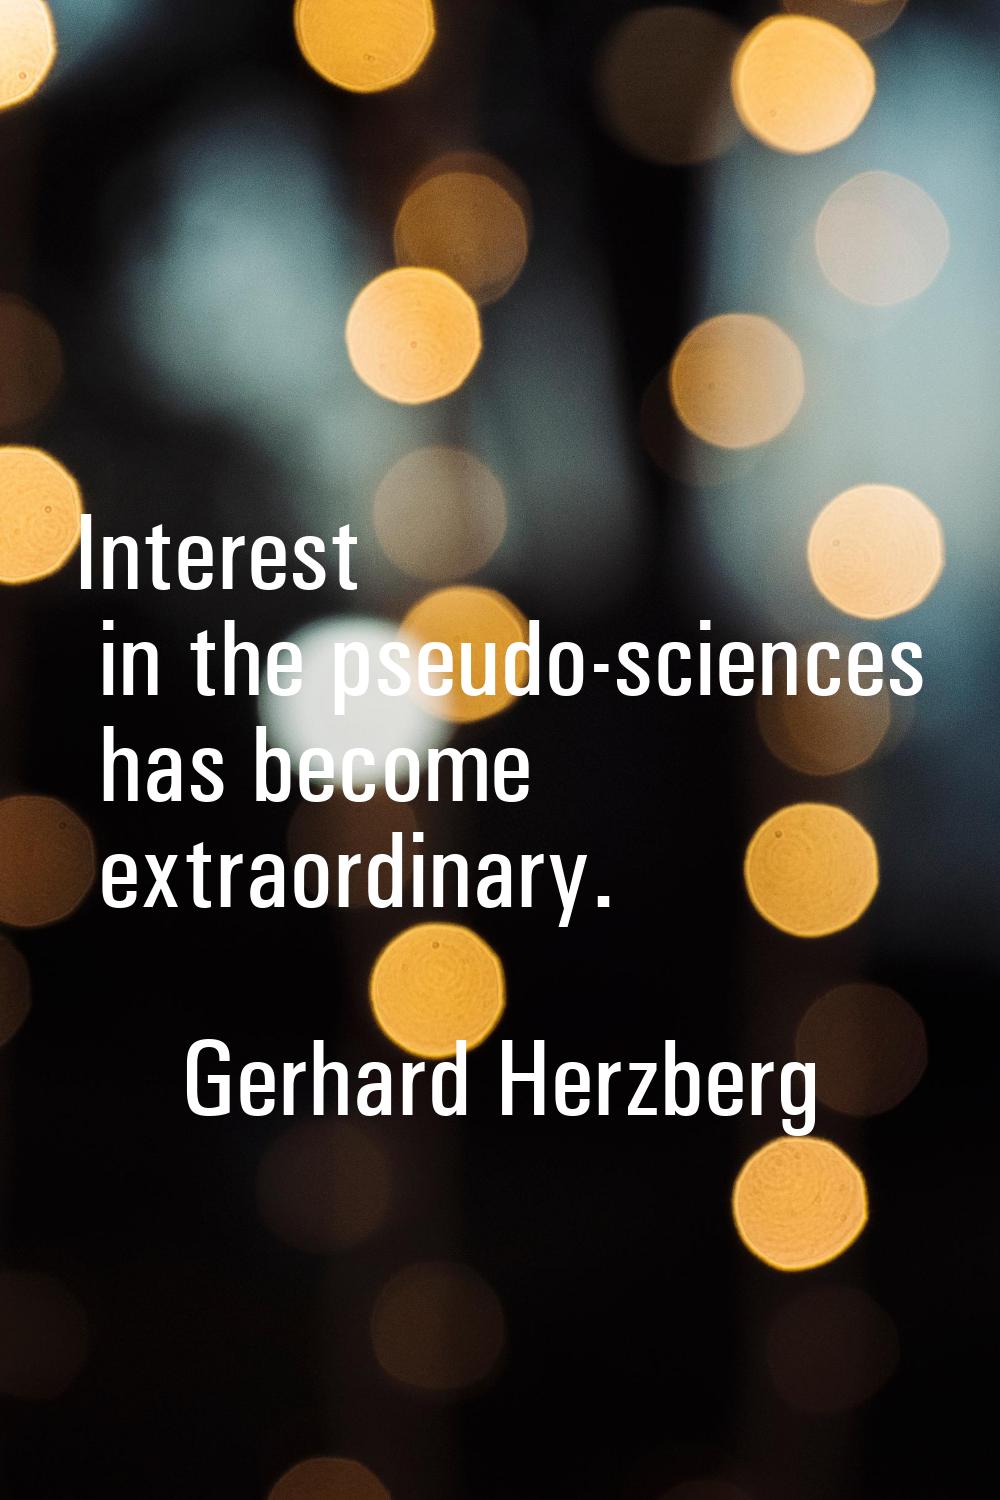 Interest in the pseudo-sciences has become extraordinary.